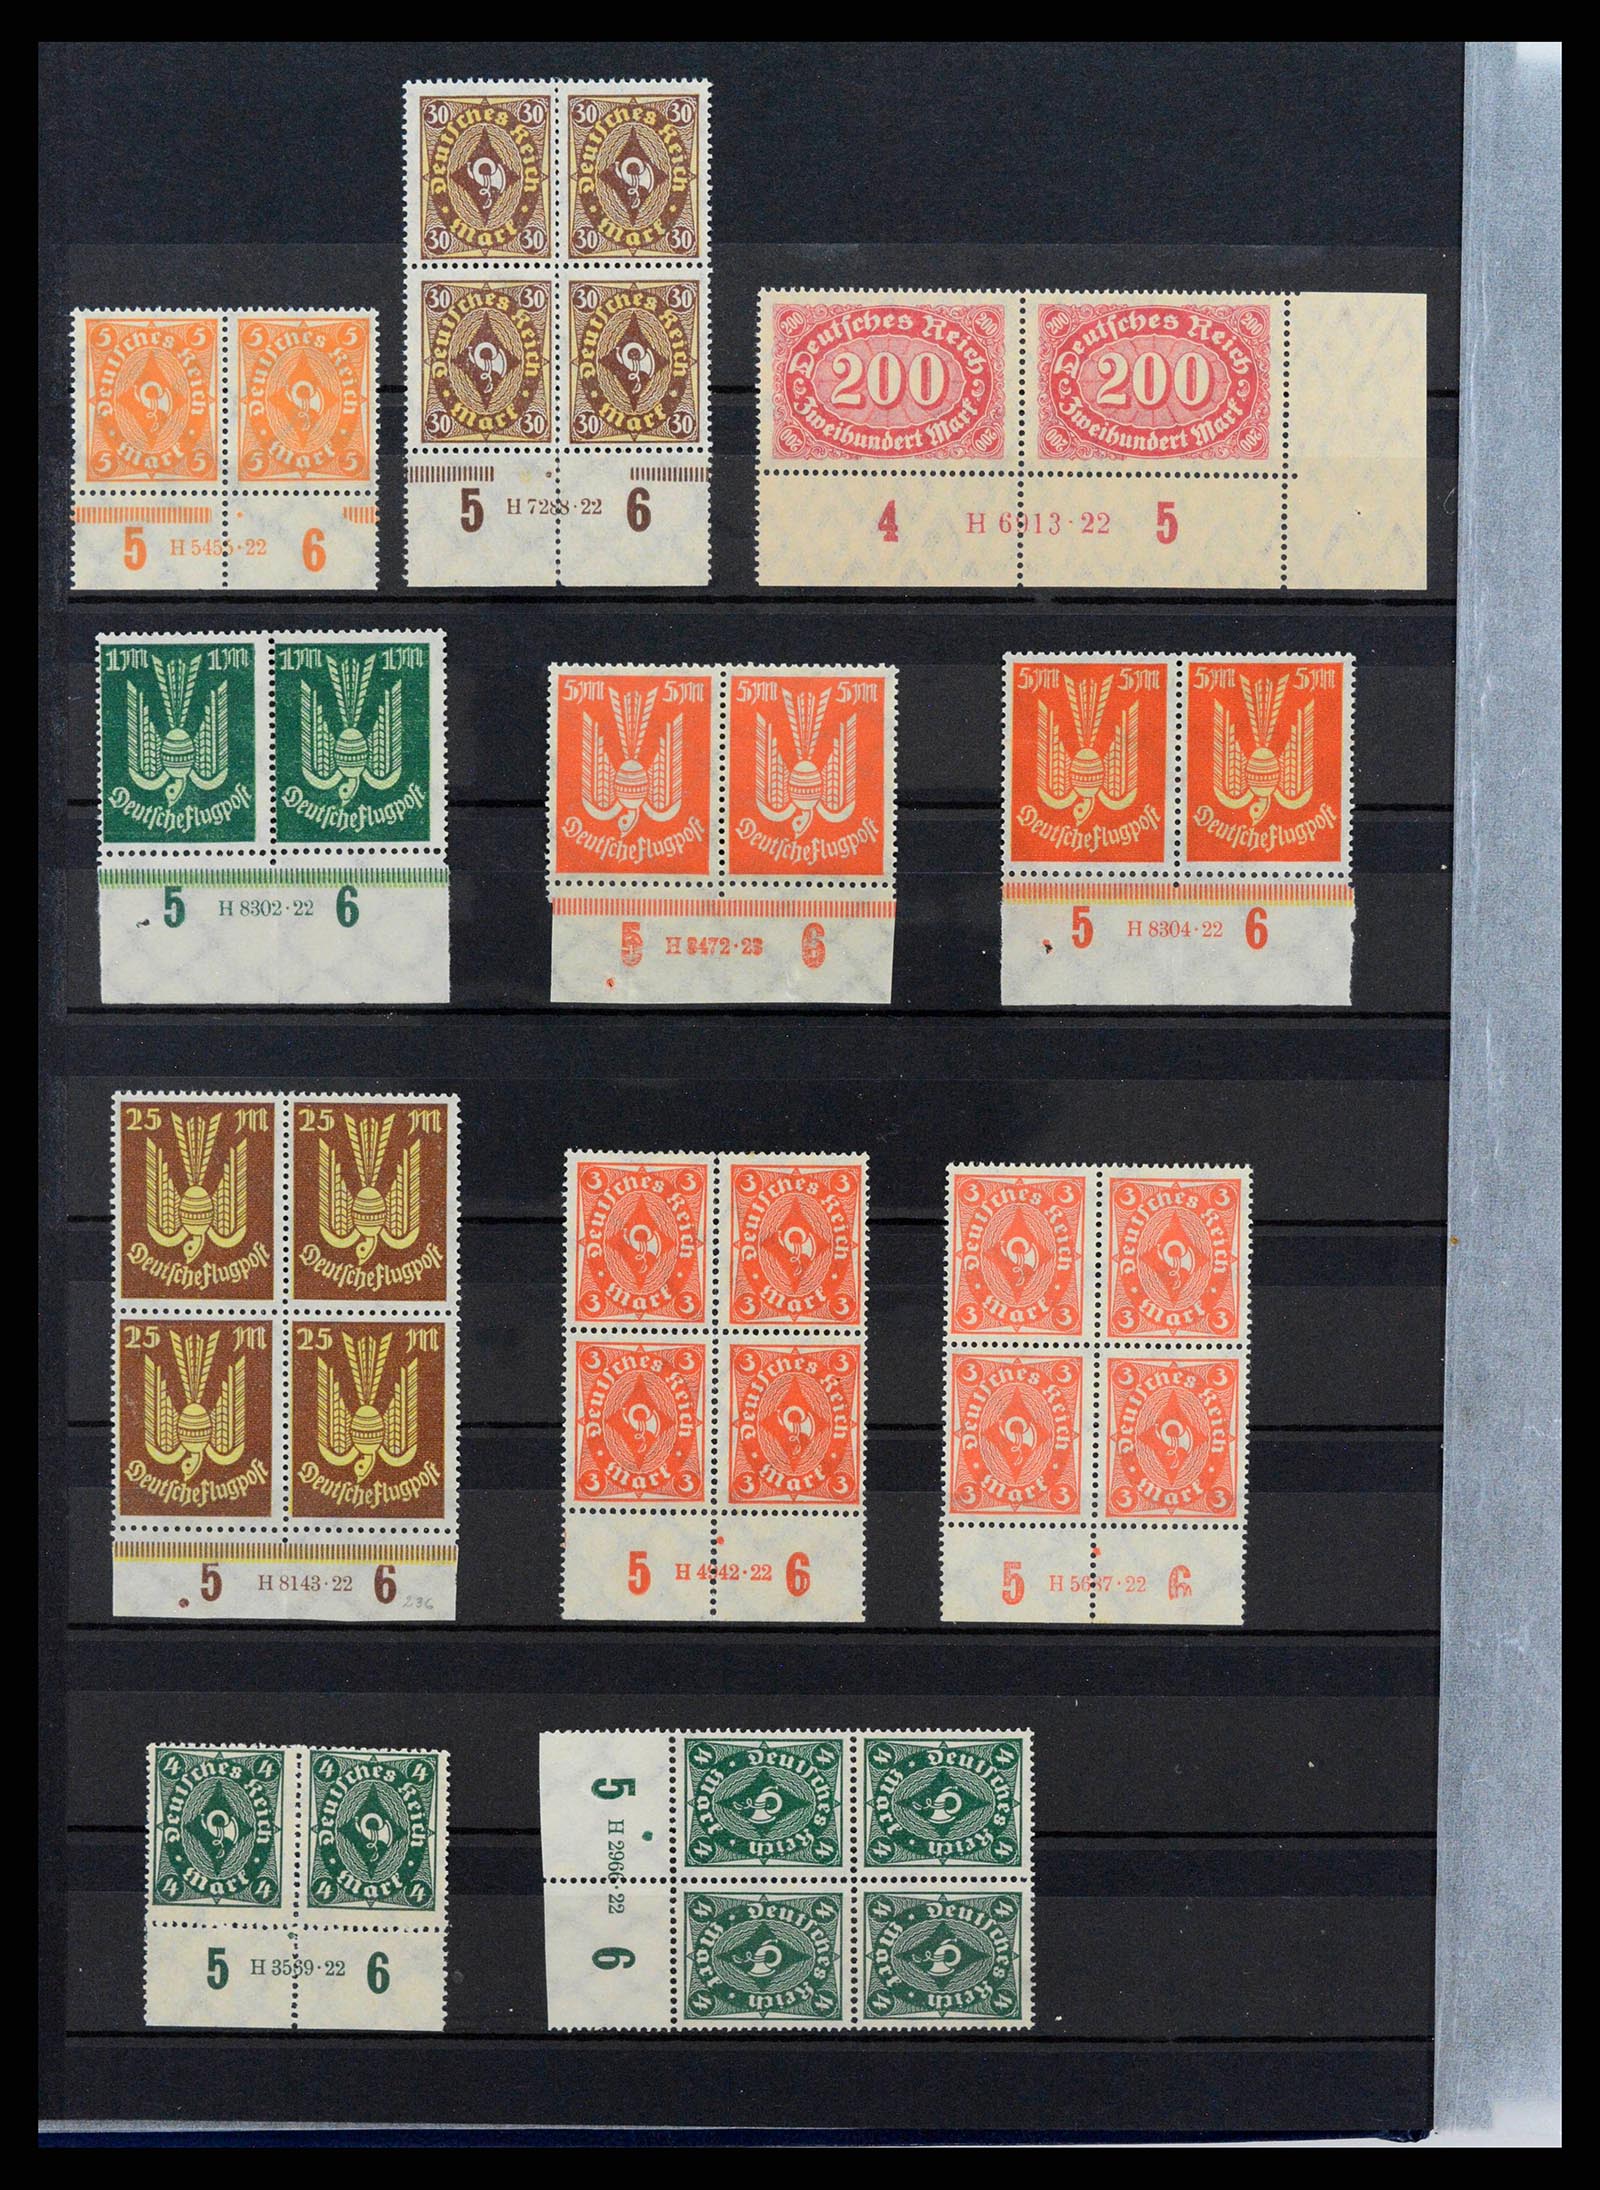 38417 0004 - Stamp collection 38417 German Reich infla 1922-1923.